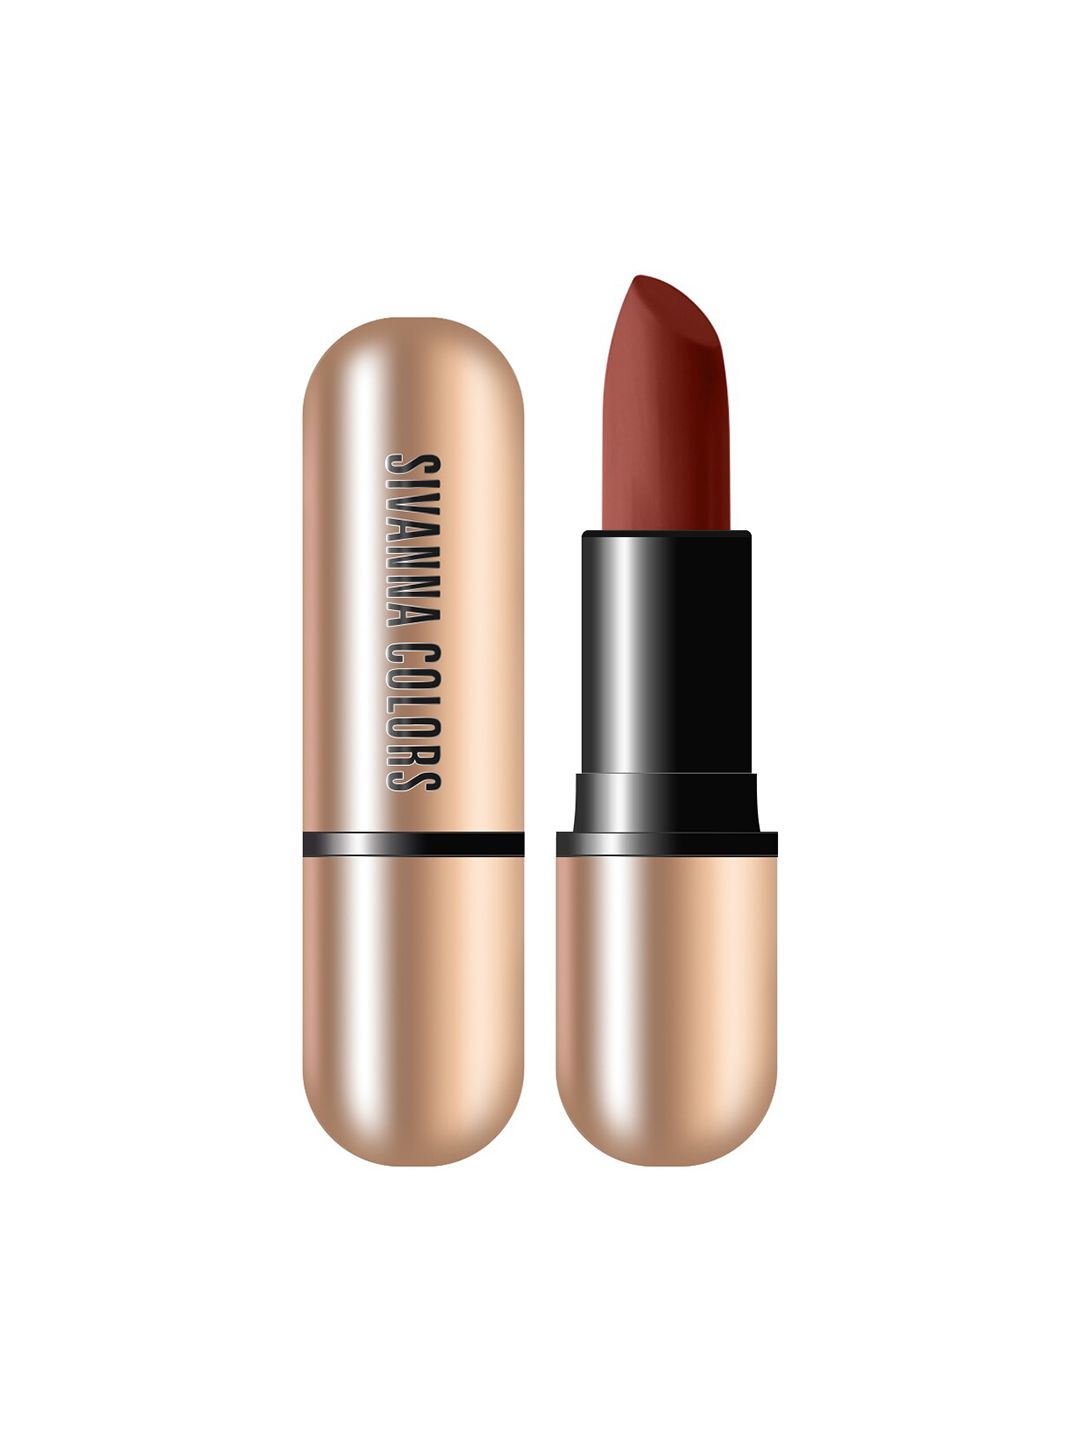 Sivanna Colors Matte Stay Lipstick Kiss Me - HF688 13 Brown Price in India